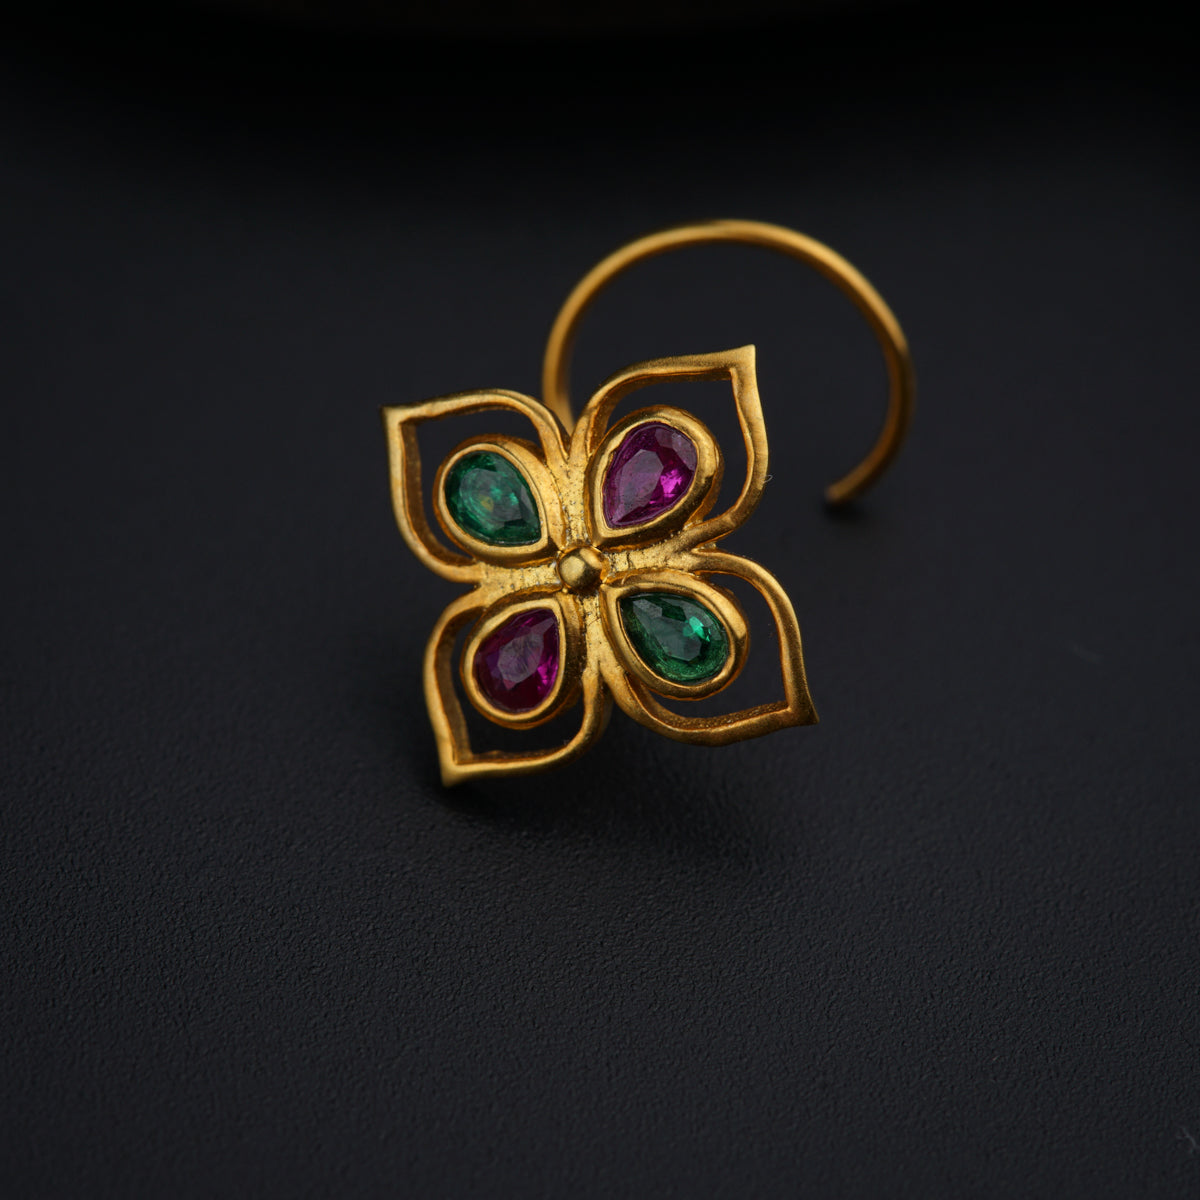 a close up of a ring with a flower design